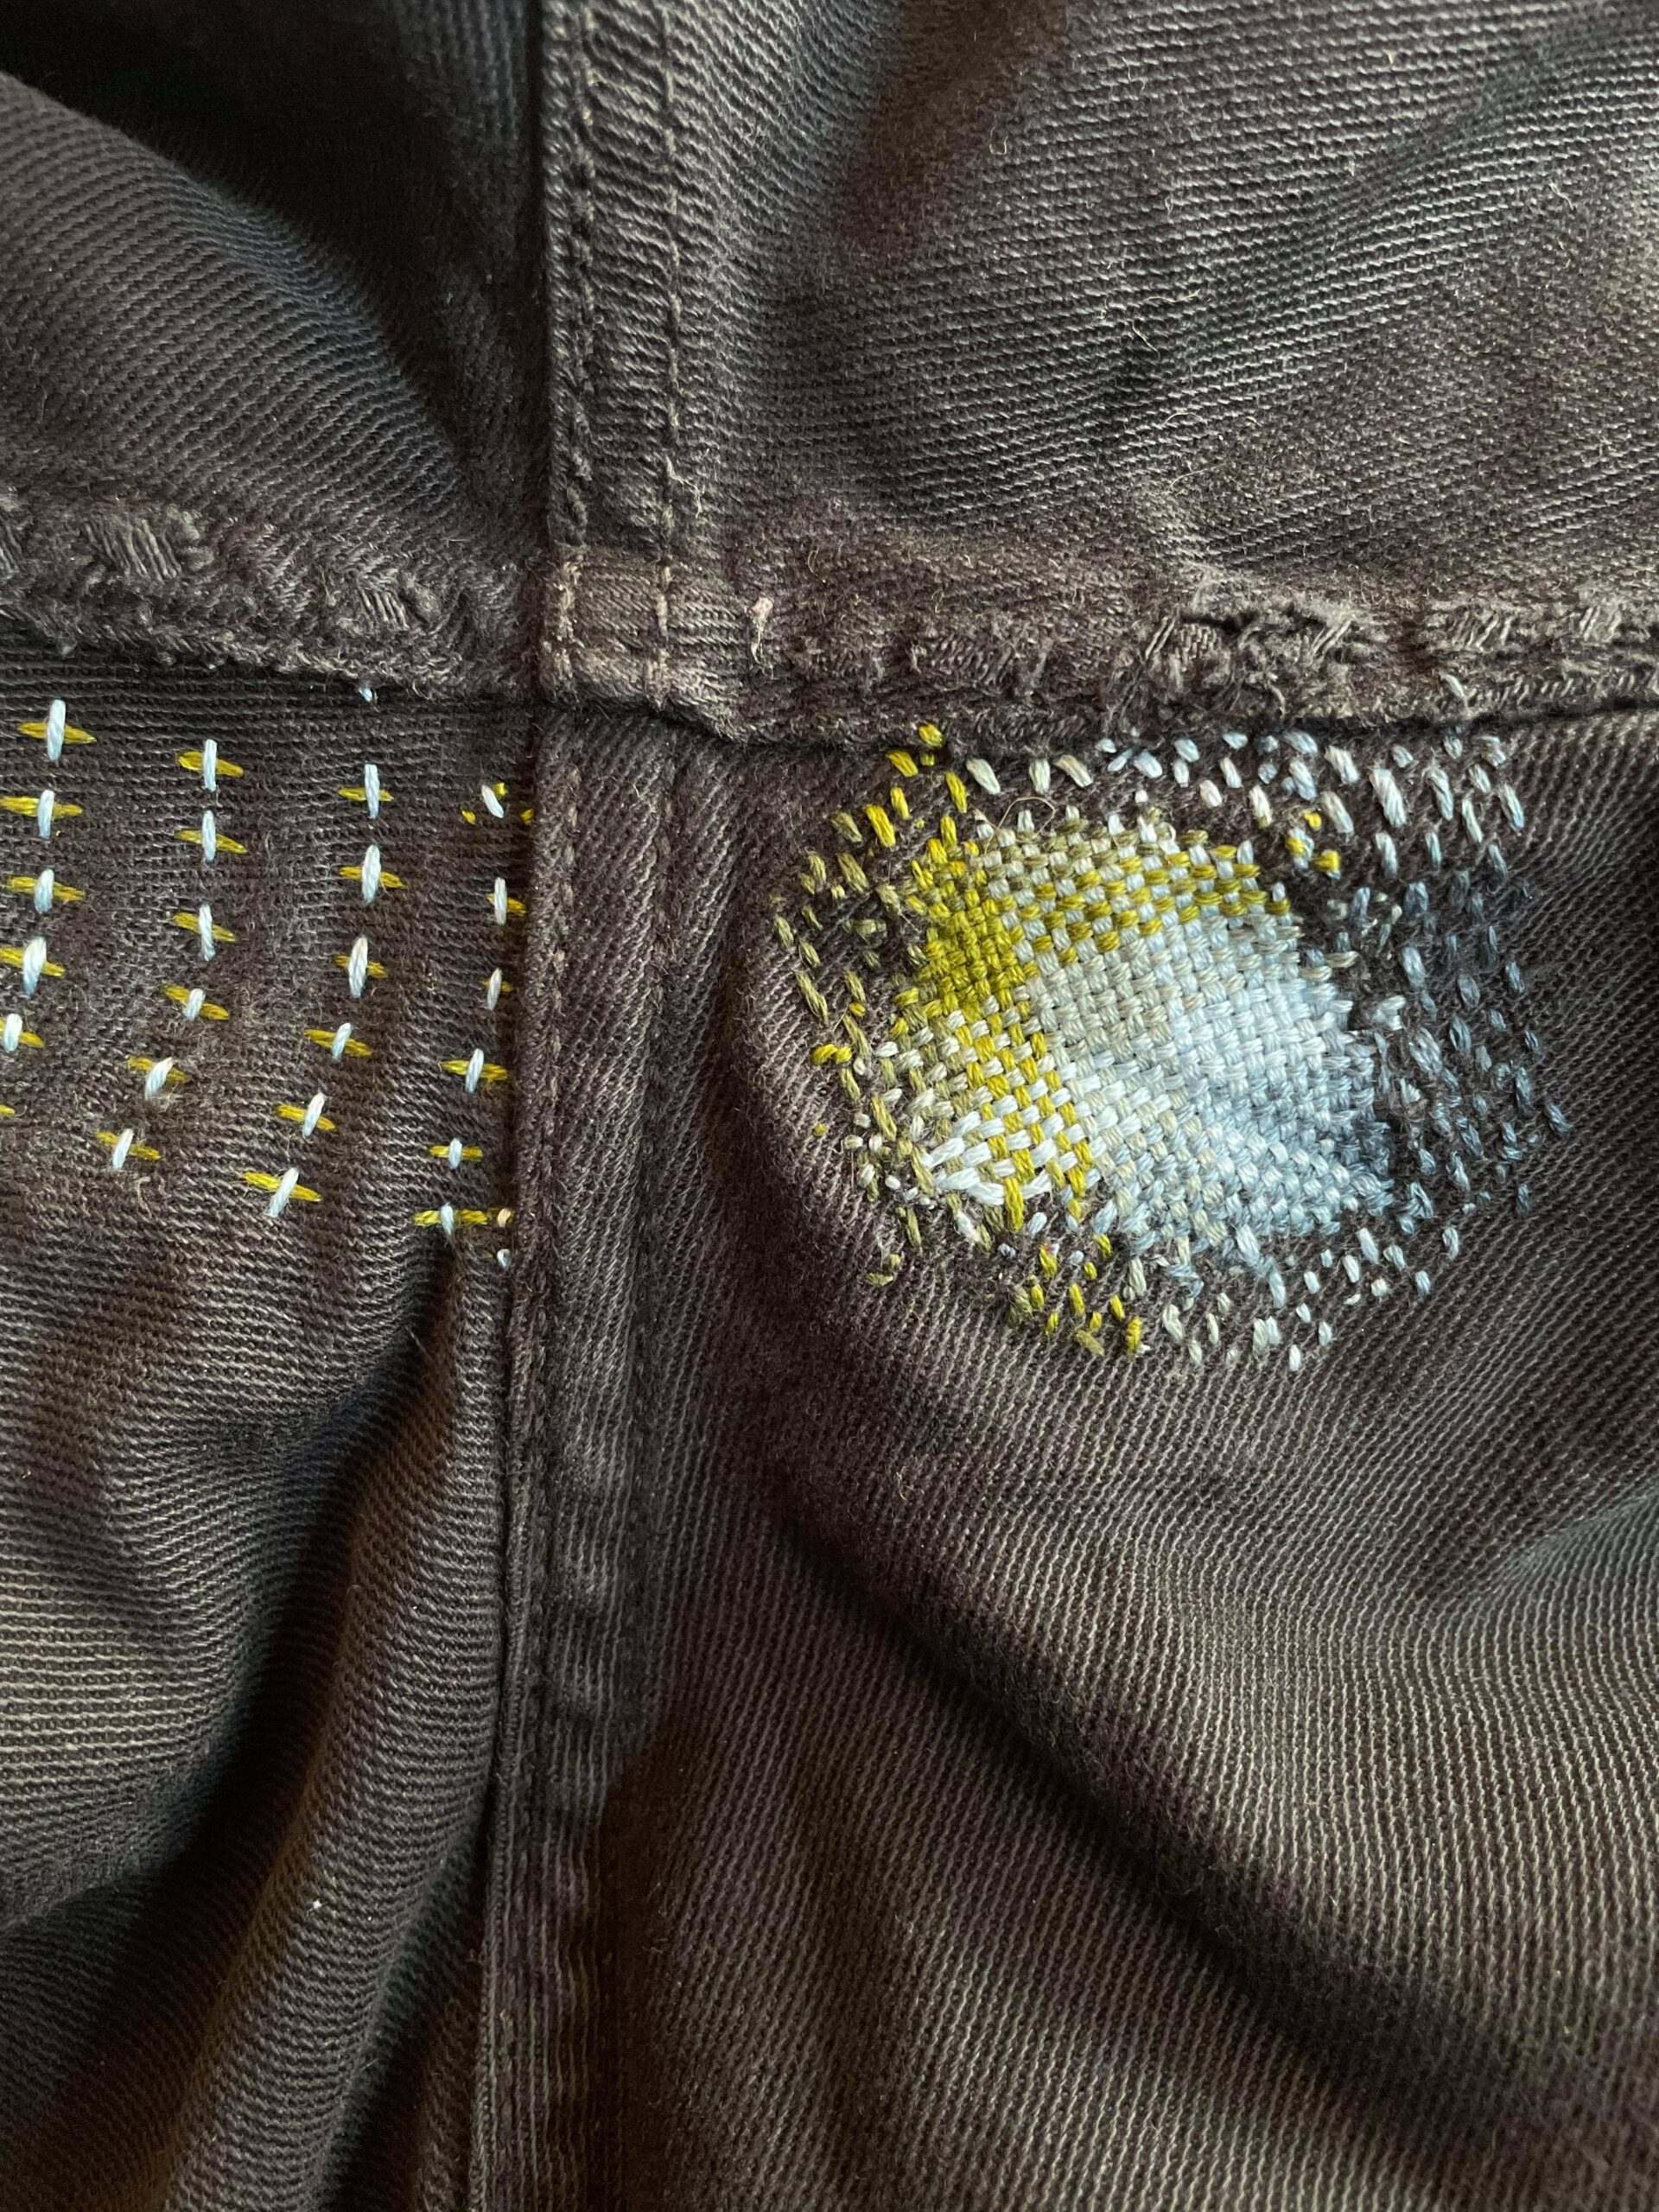 A jean crotch repair, with sashiko stitching on the left and visible mending (darning) on the right